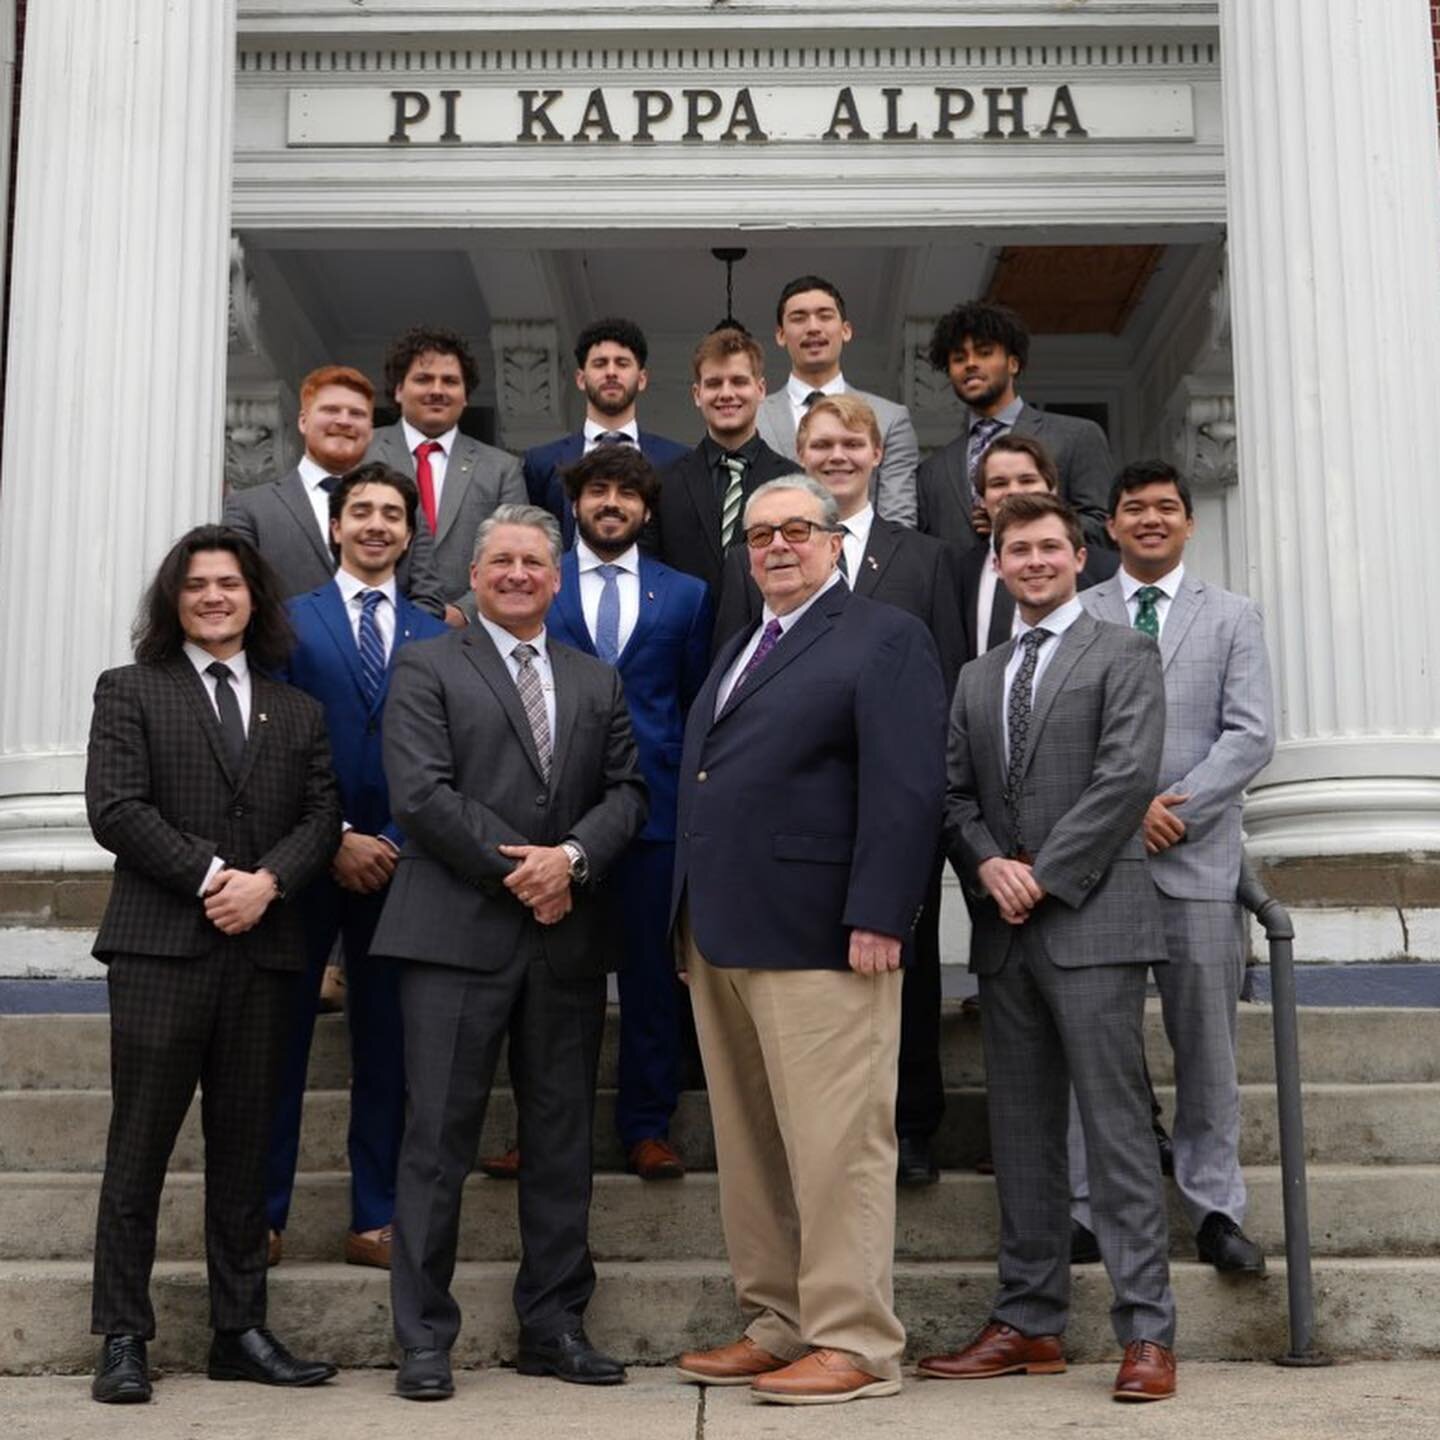 This weekend we had the pleasure to special initiate Bob Dziatczak, father of Mark Dziatczak a Delta Nu &lsquo;91 Alumnus and former International President of Pi Kappa Alpha.

It was an honor to be able to initiate another brother into the bonds of 